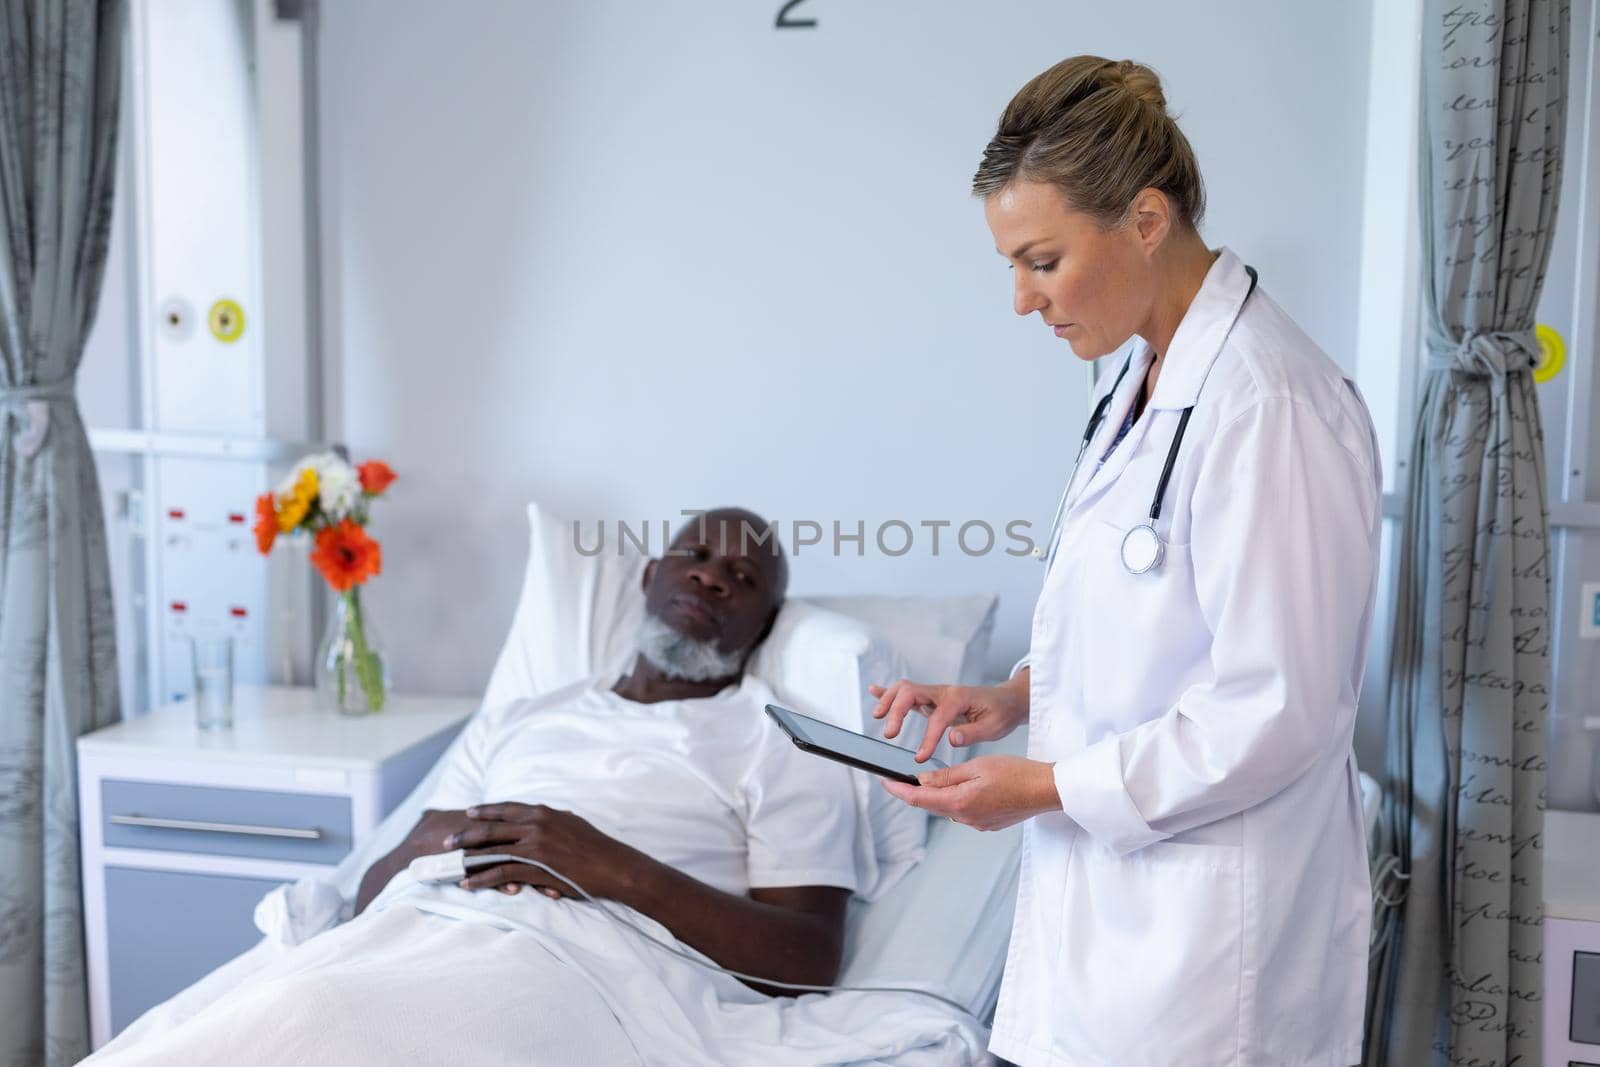 Caucasian female doctor standing next to african american male in hospital patient room using tablet. medicine, health and healthcare services.